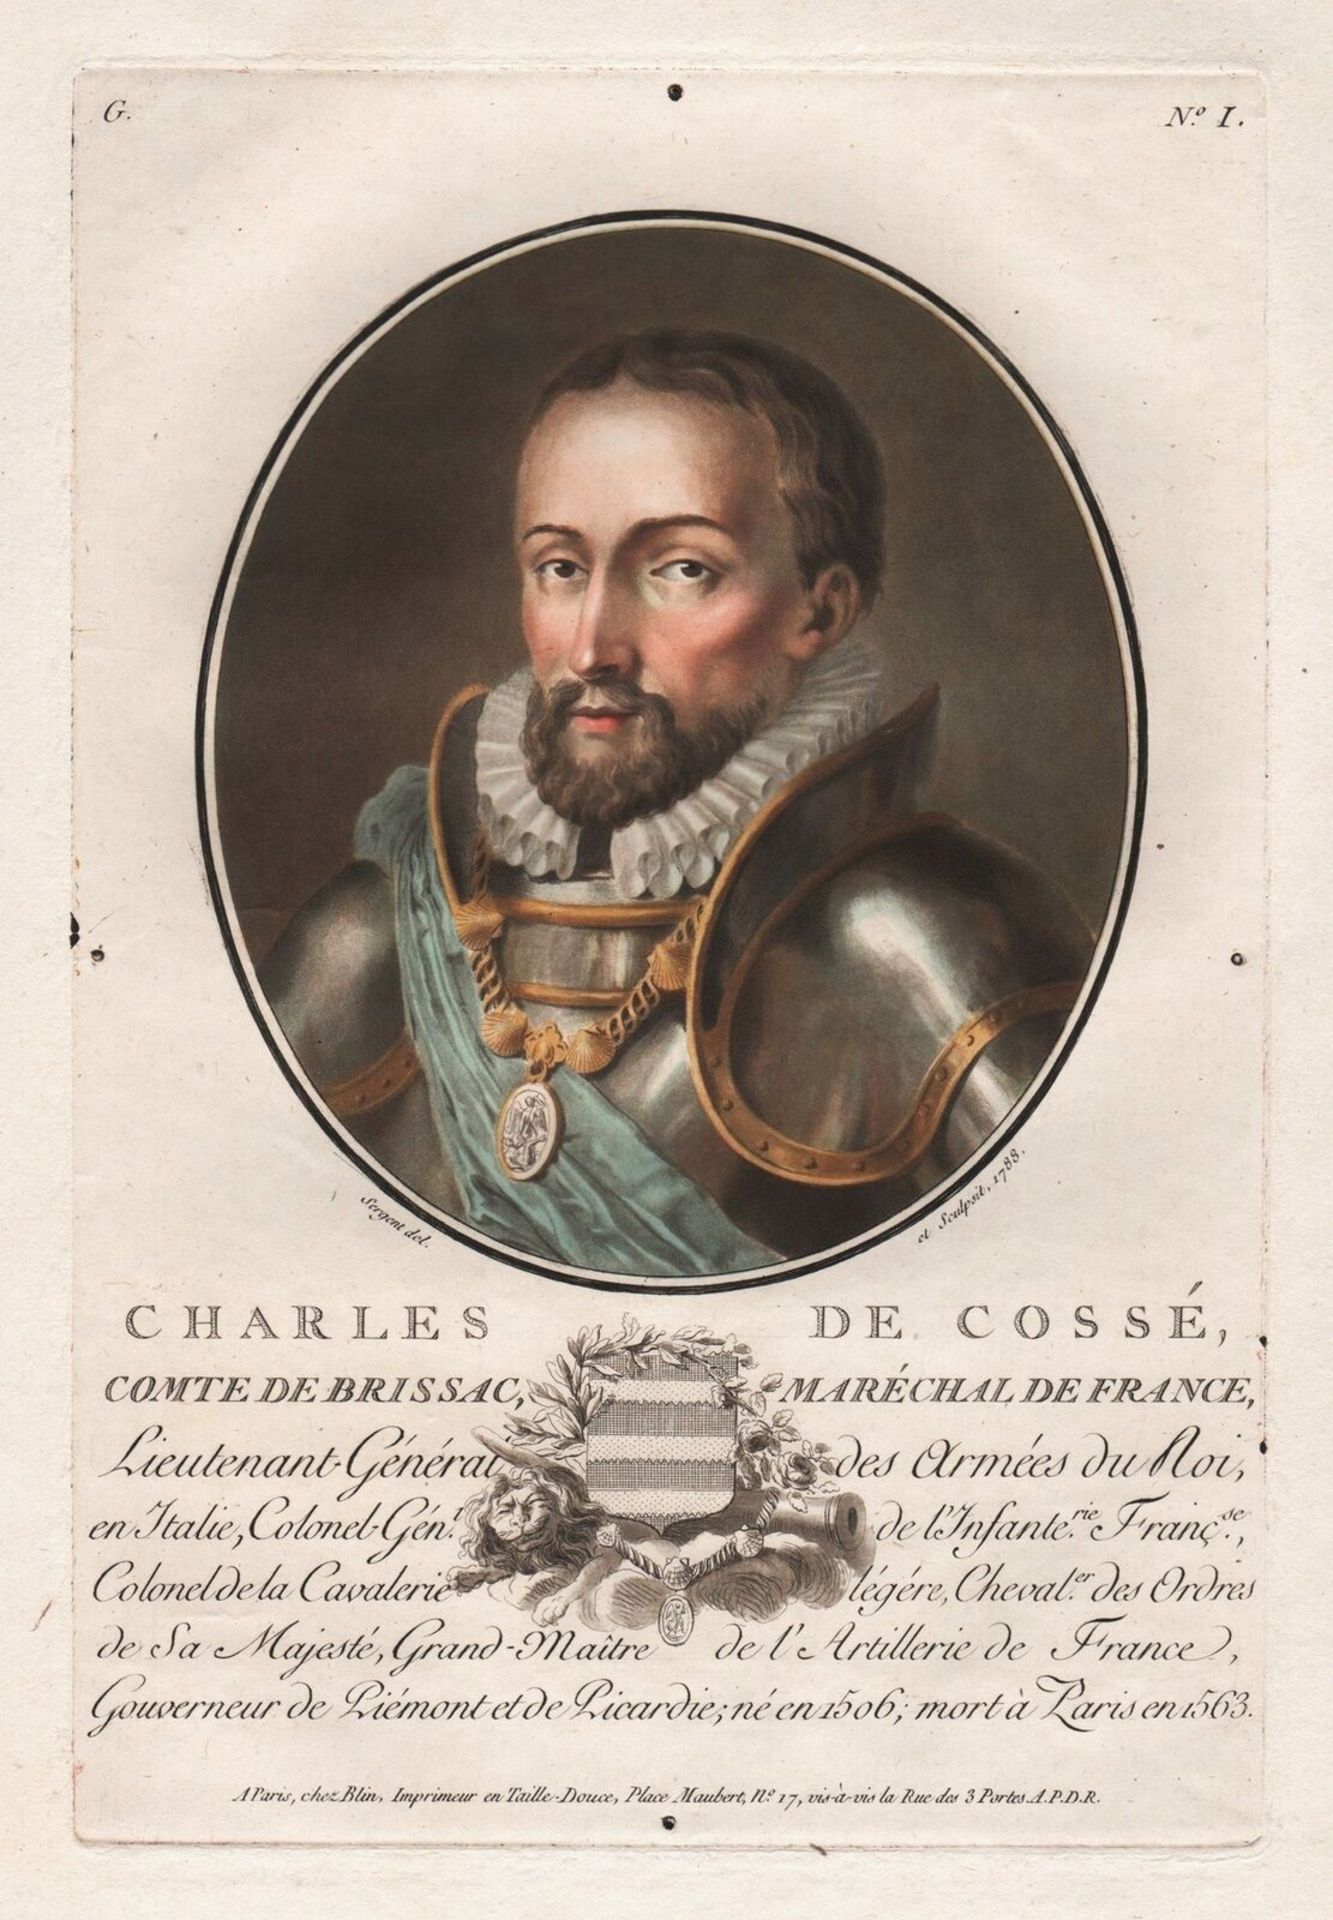 Portrait of Charles de Cossé, Count of Brissac (1505/6-1563) French Soldier, Courtier & Marshal